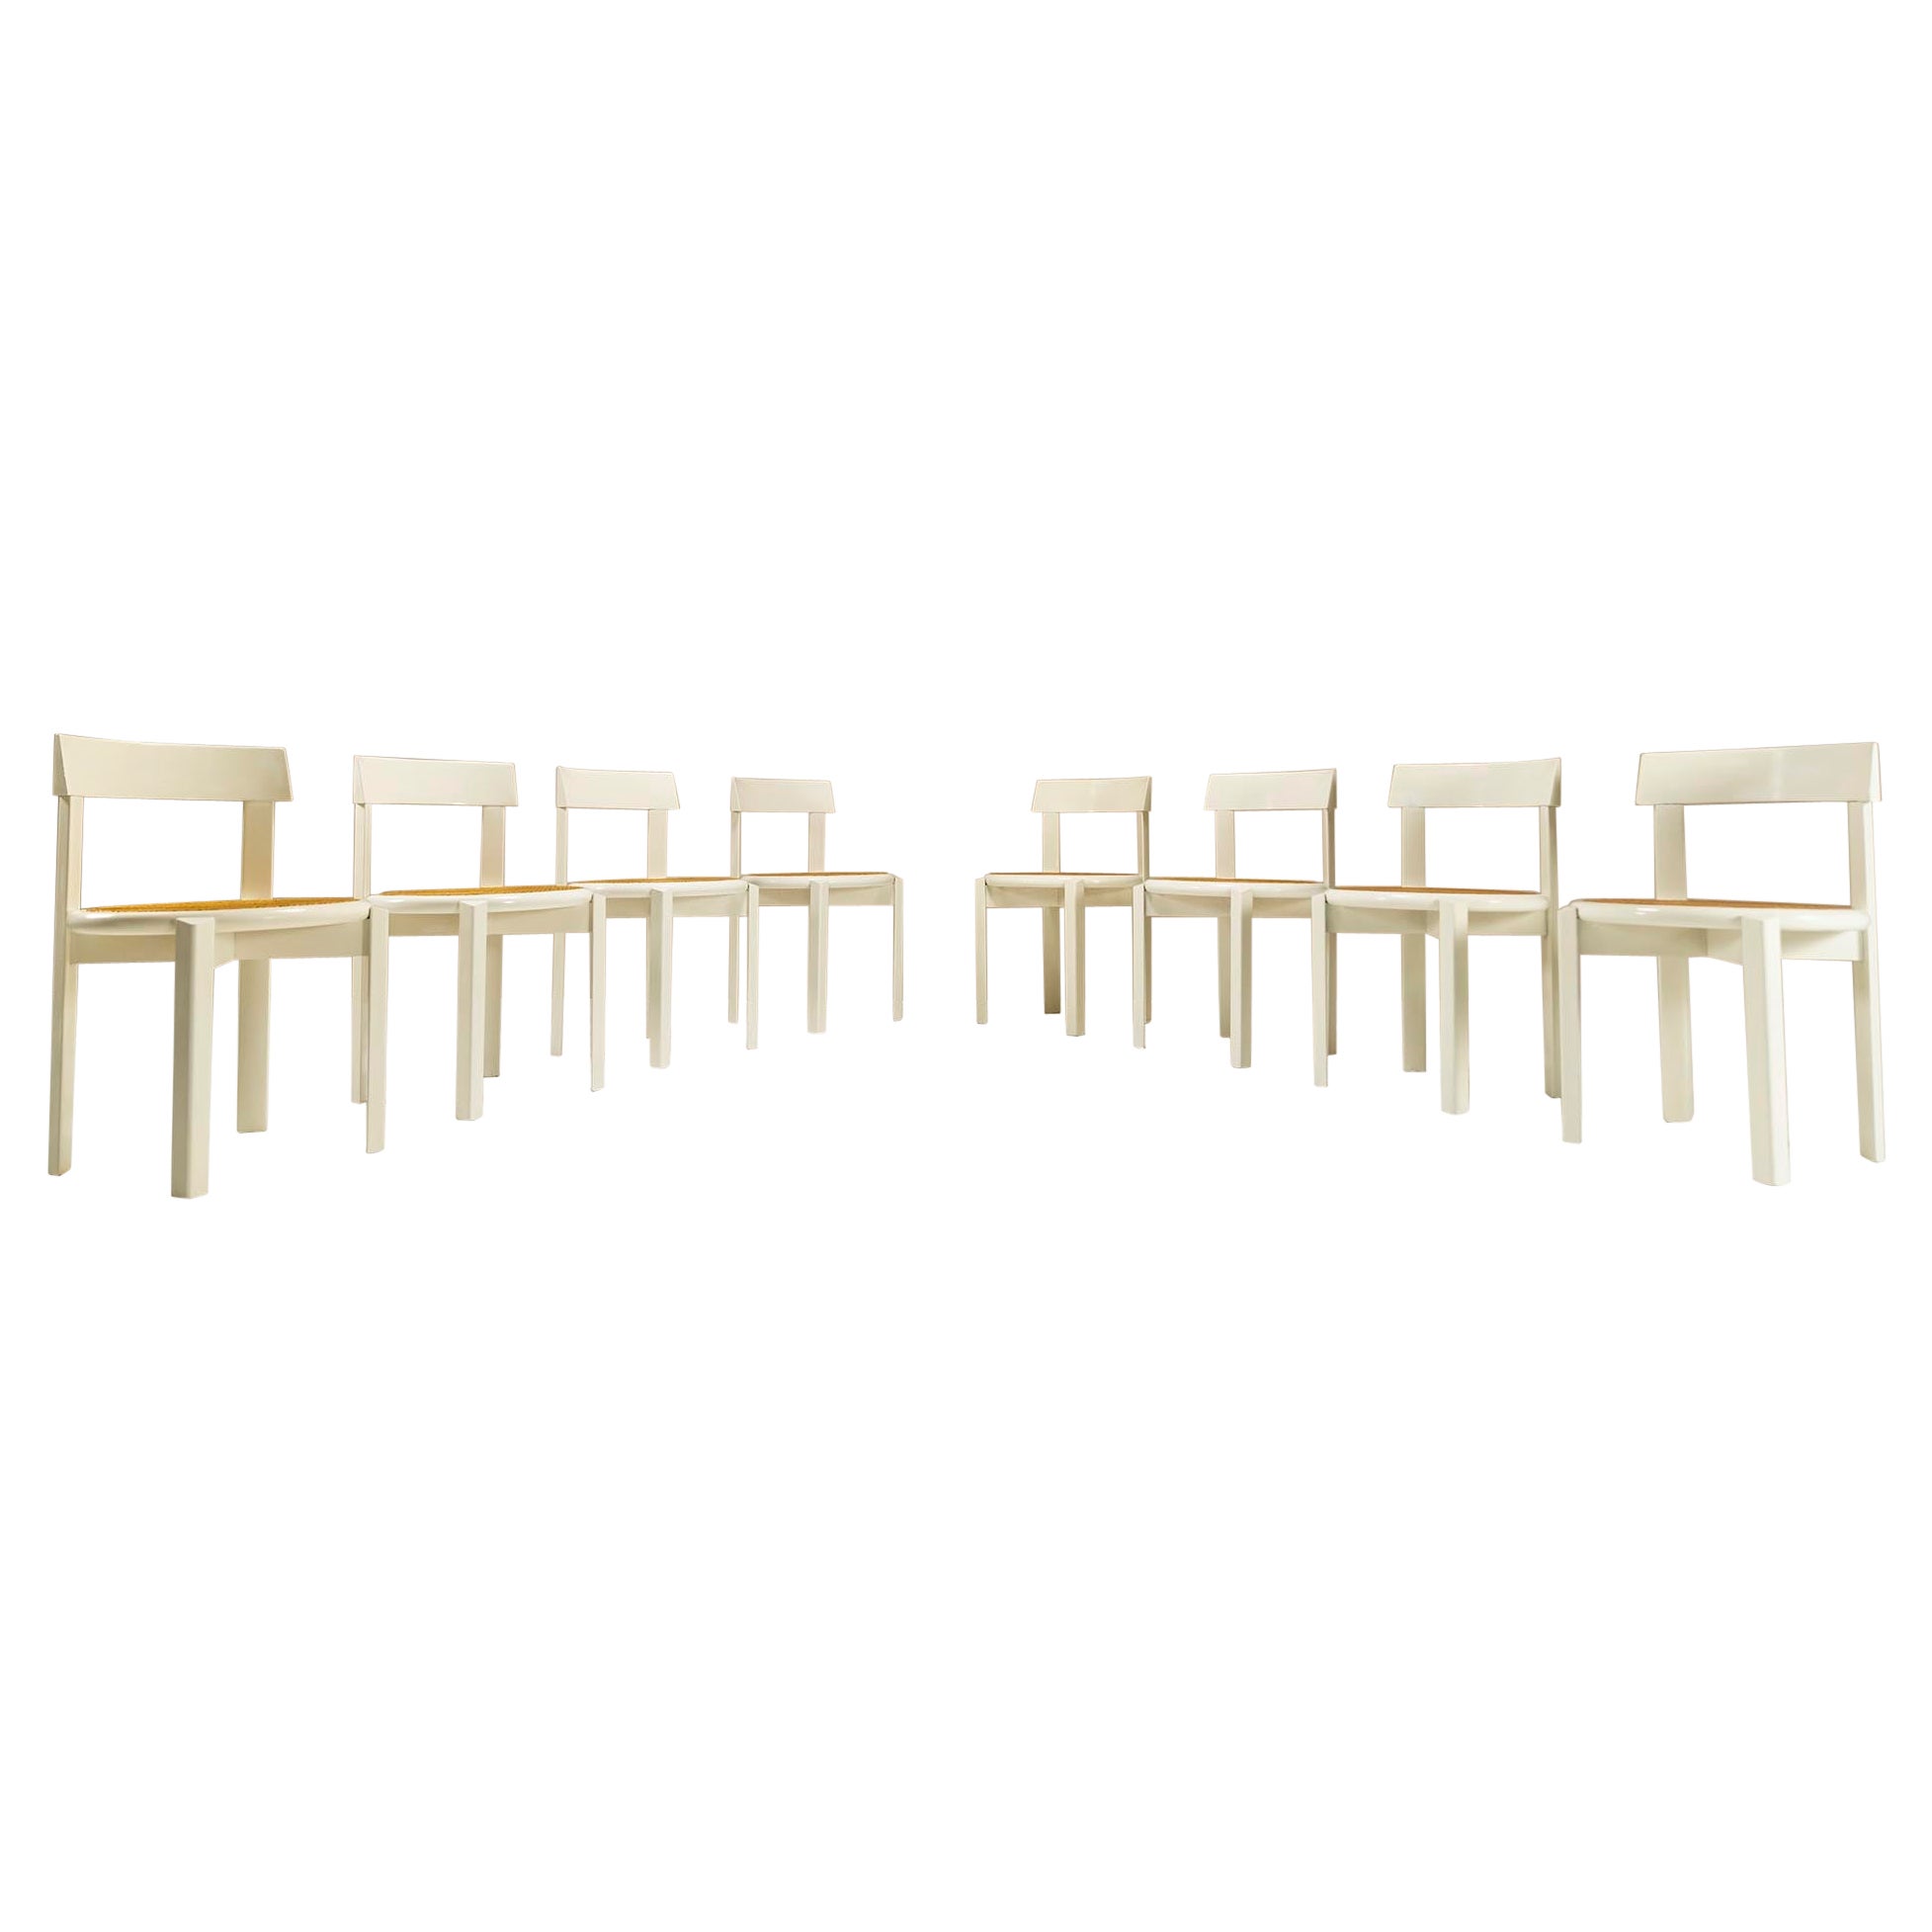 Set of 8 Dining Chairs in White Lacquered Wood and Wicker, Italy, 1980s